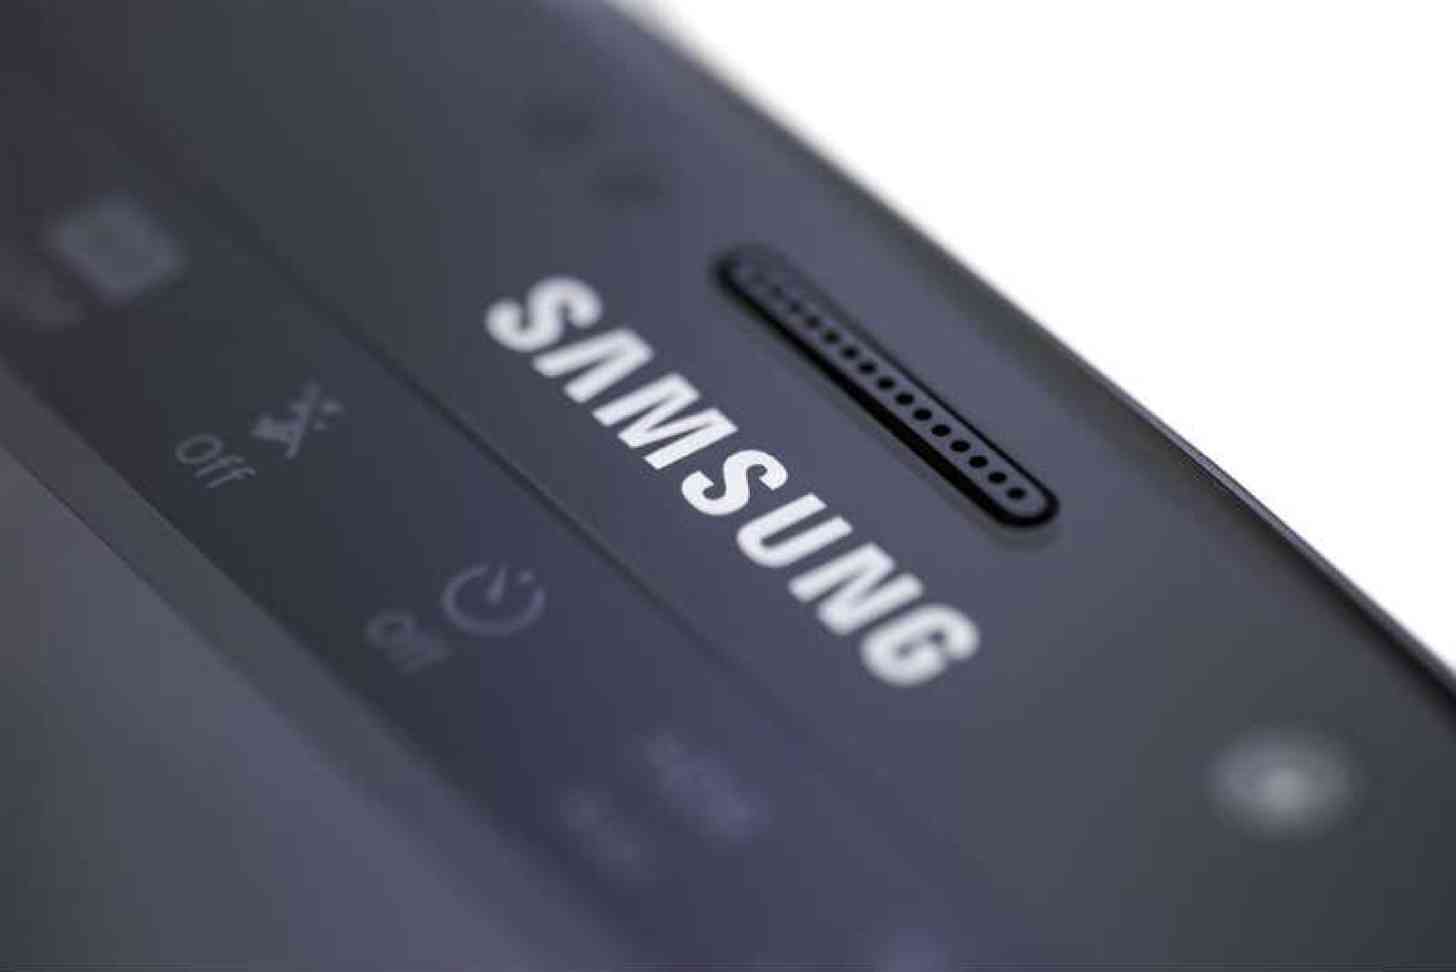 Samsung Rumored to be Working on Smartphone with a Foldable Display